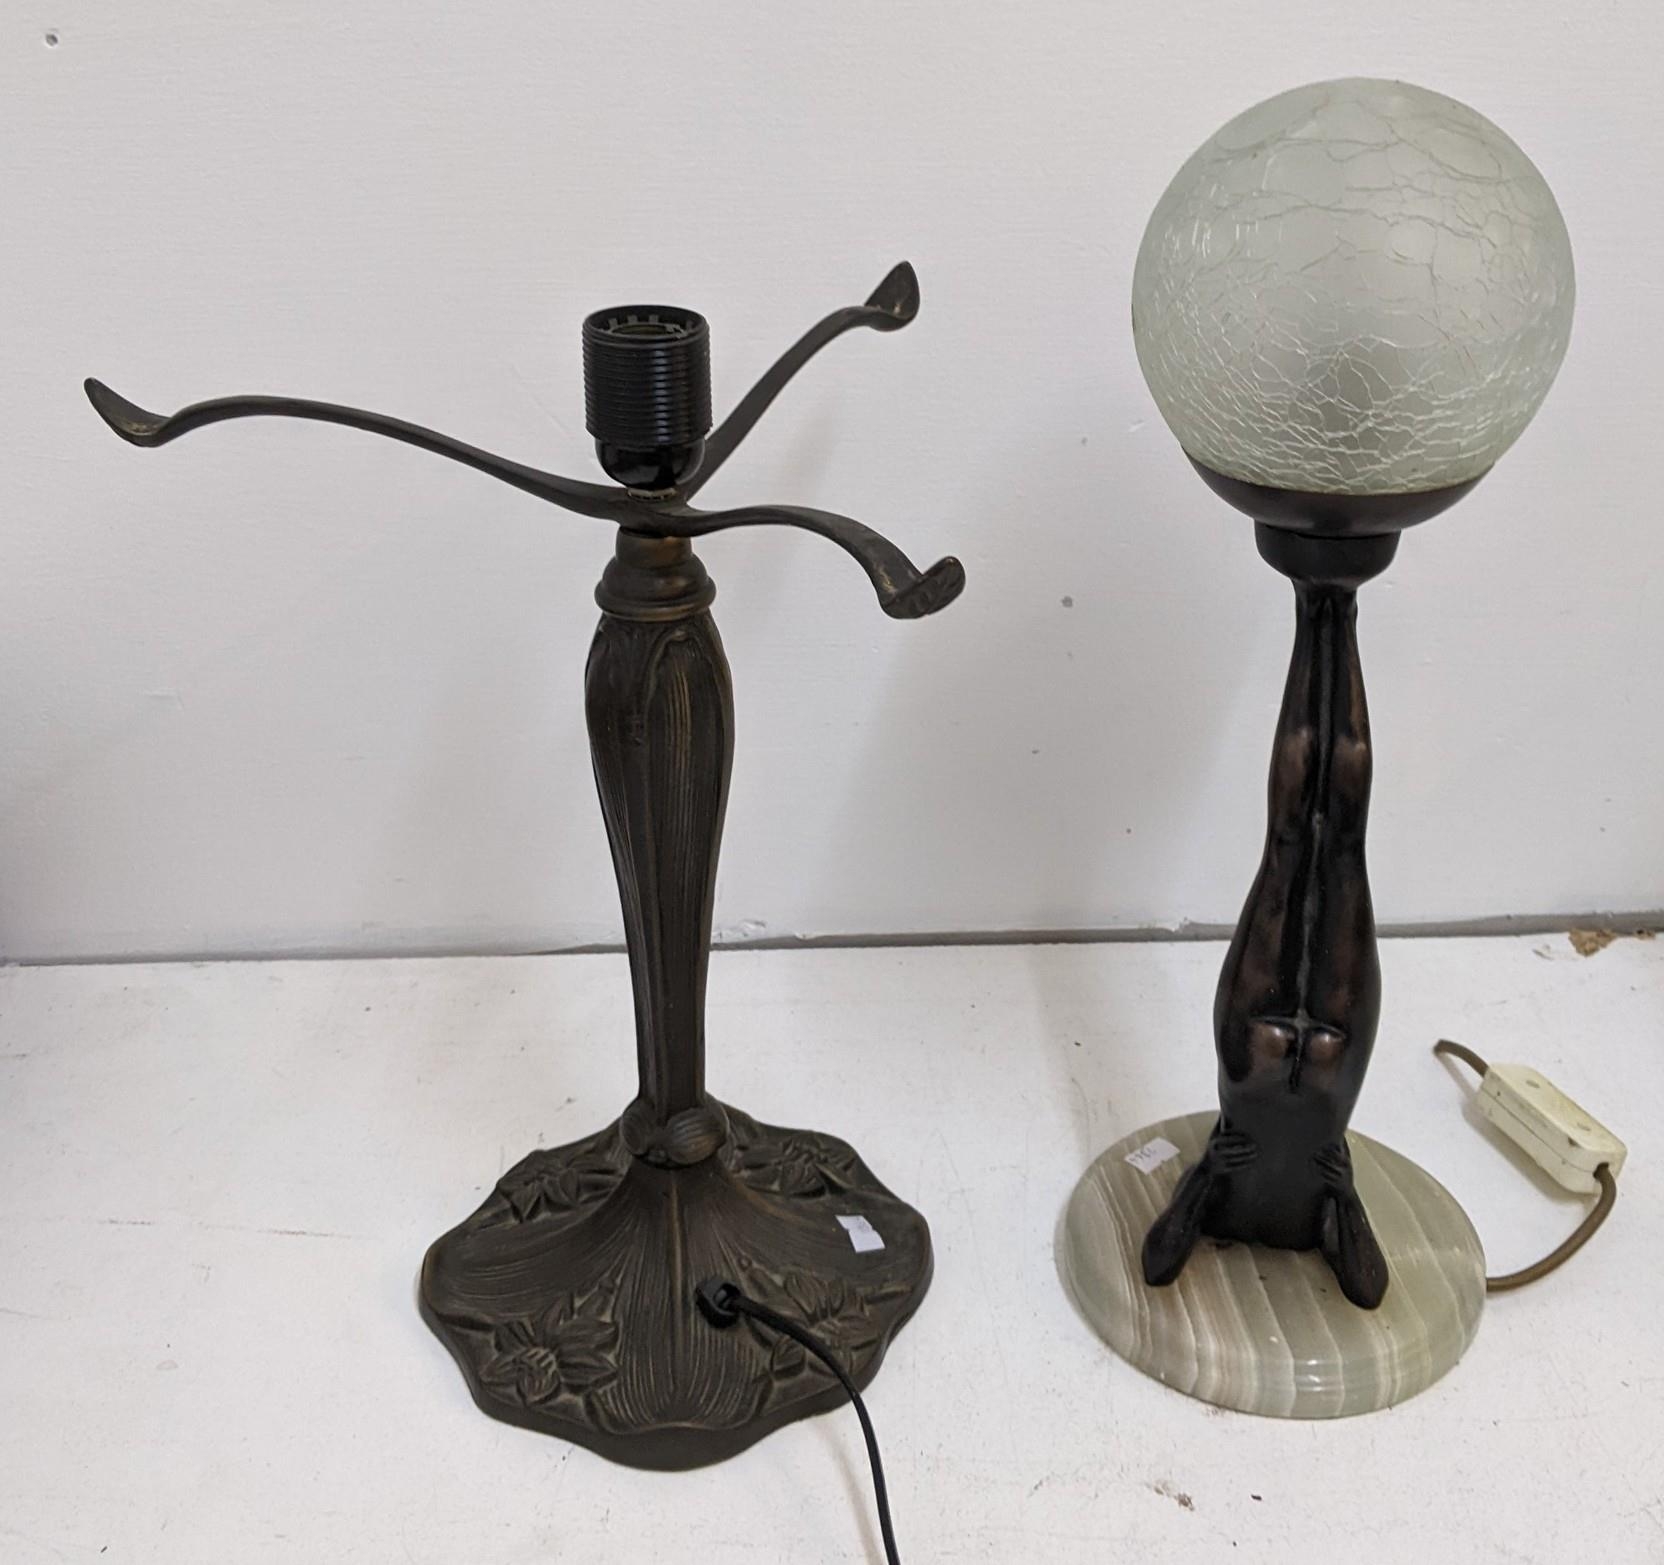 Lighting equipment to include three lamps made from composite material, two in the shape of figures, - Image 3 of 5